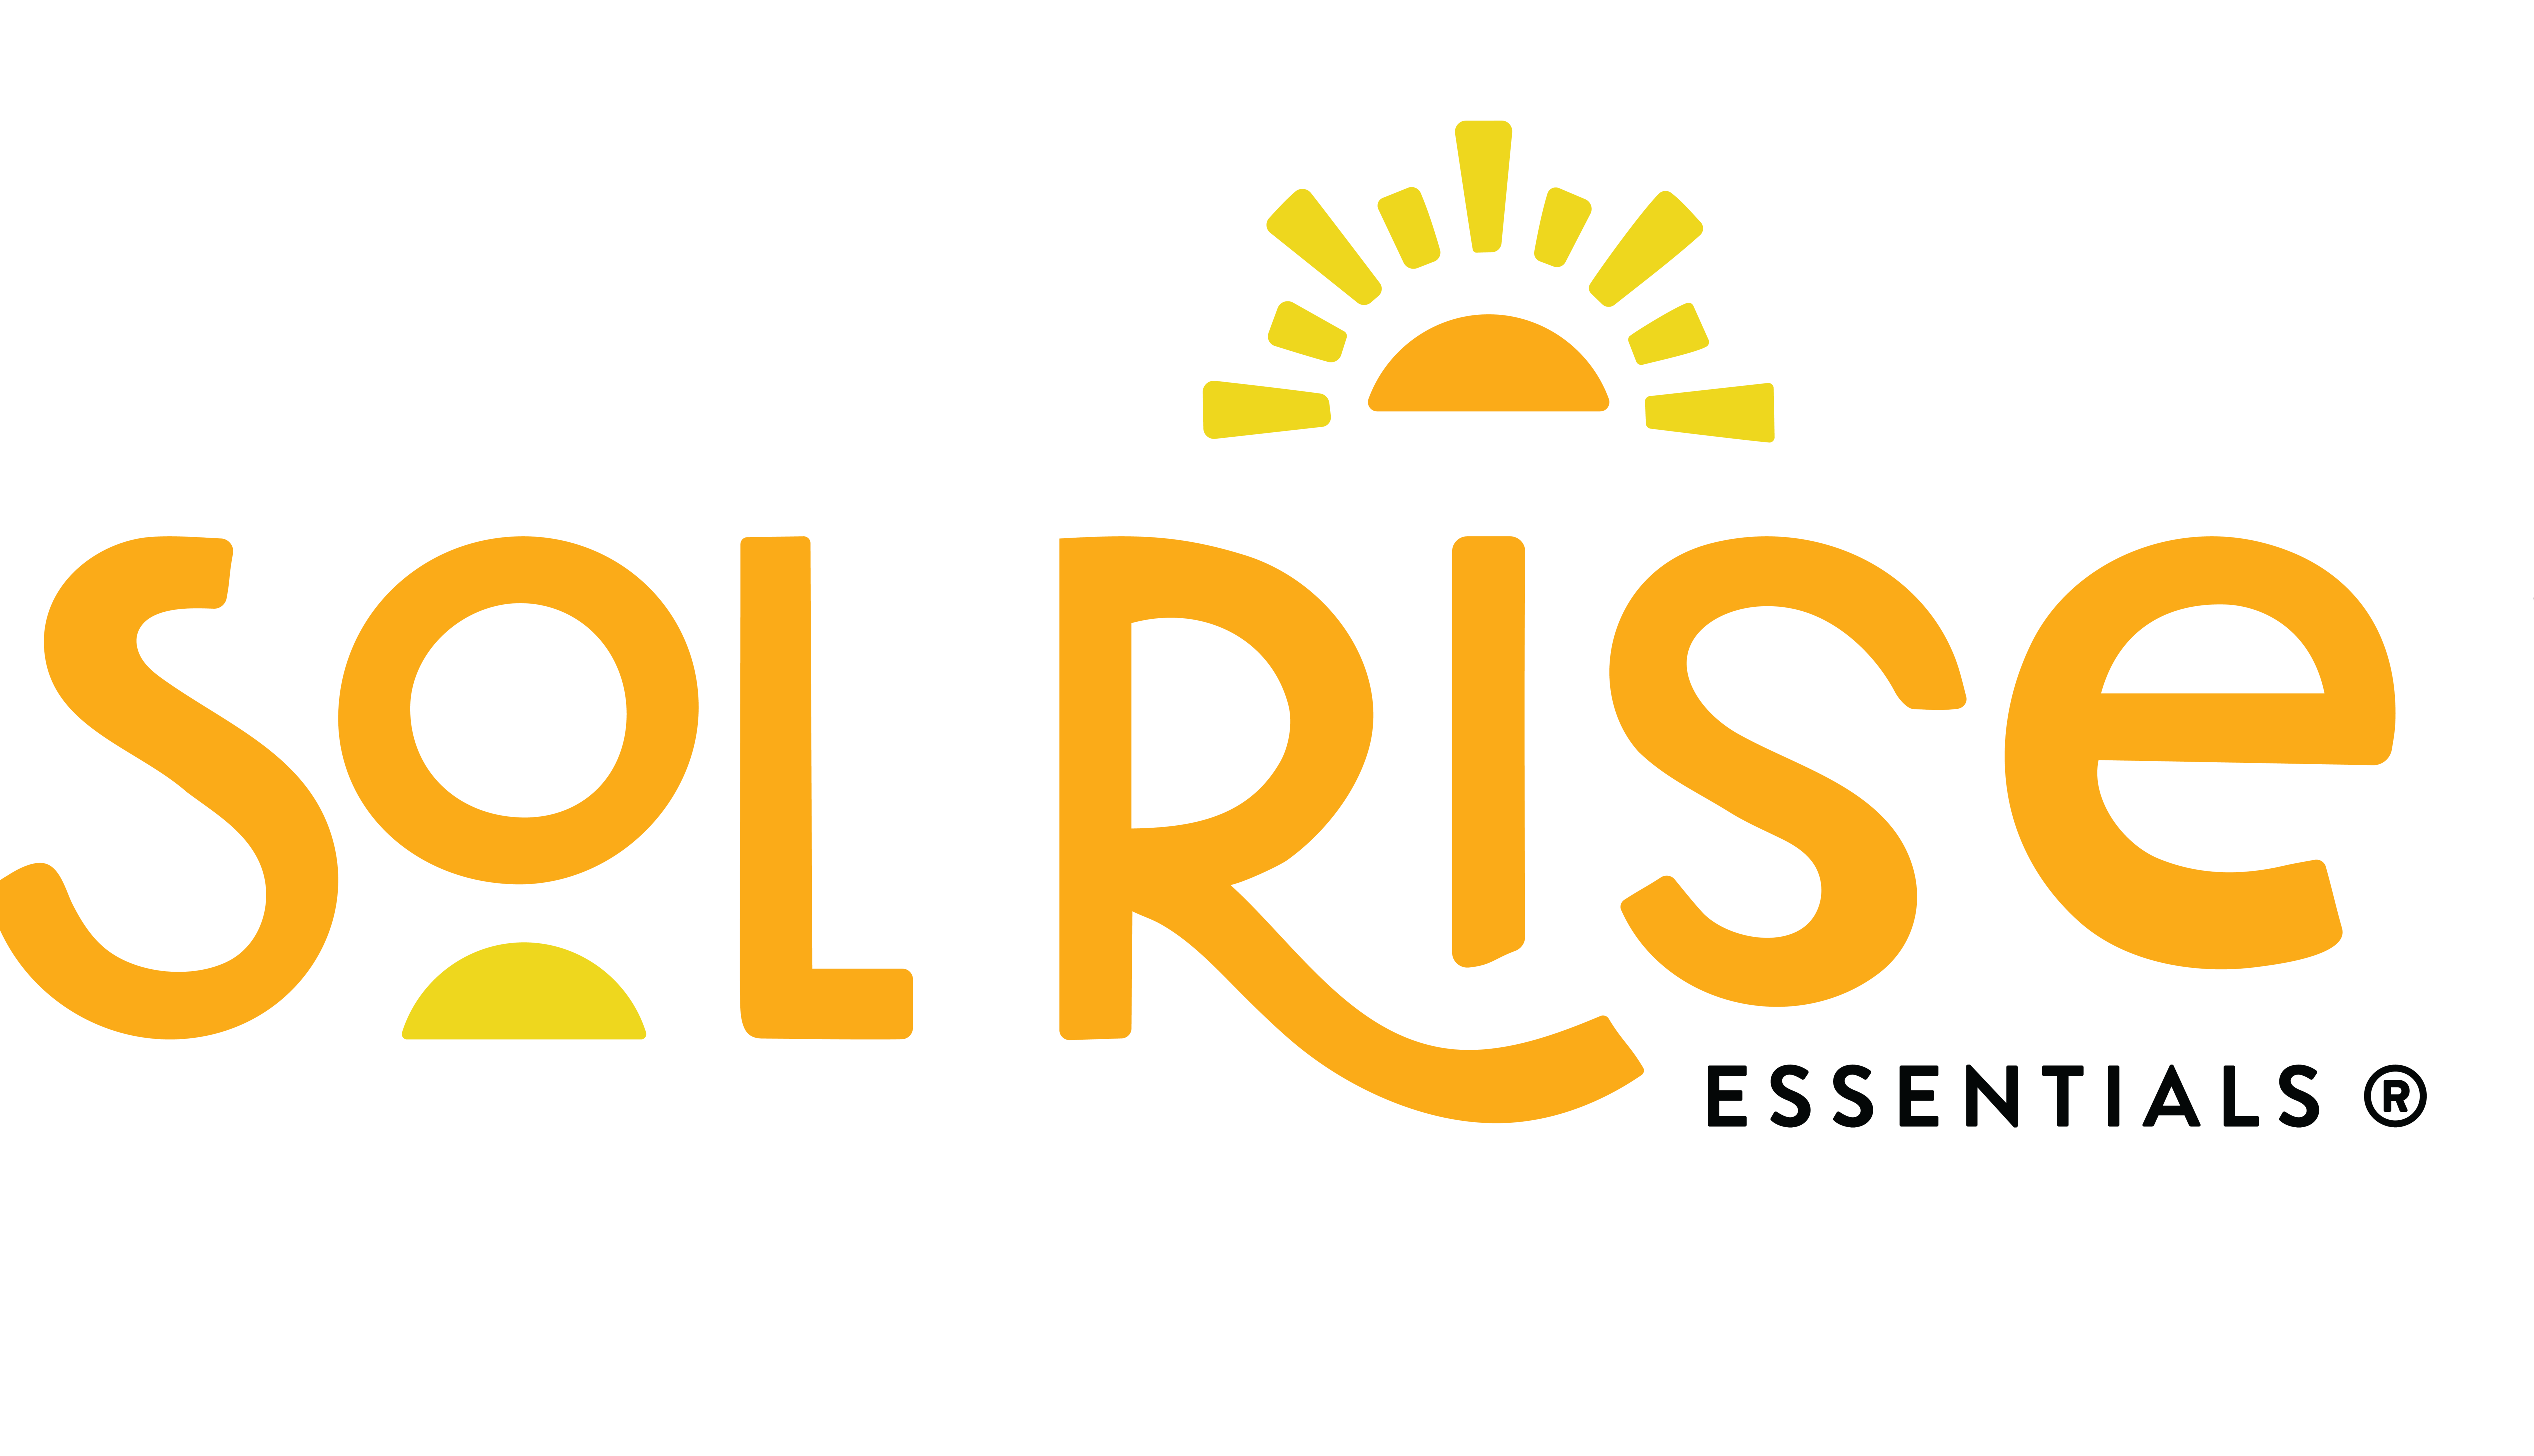 The logo or business face of "Sol Rise Essentials"